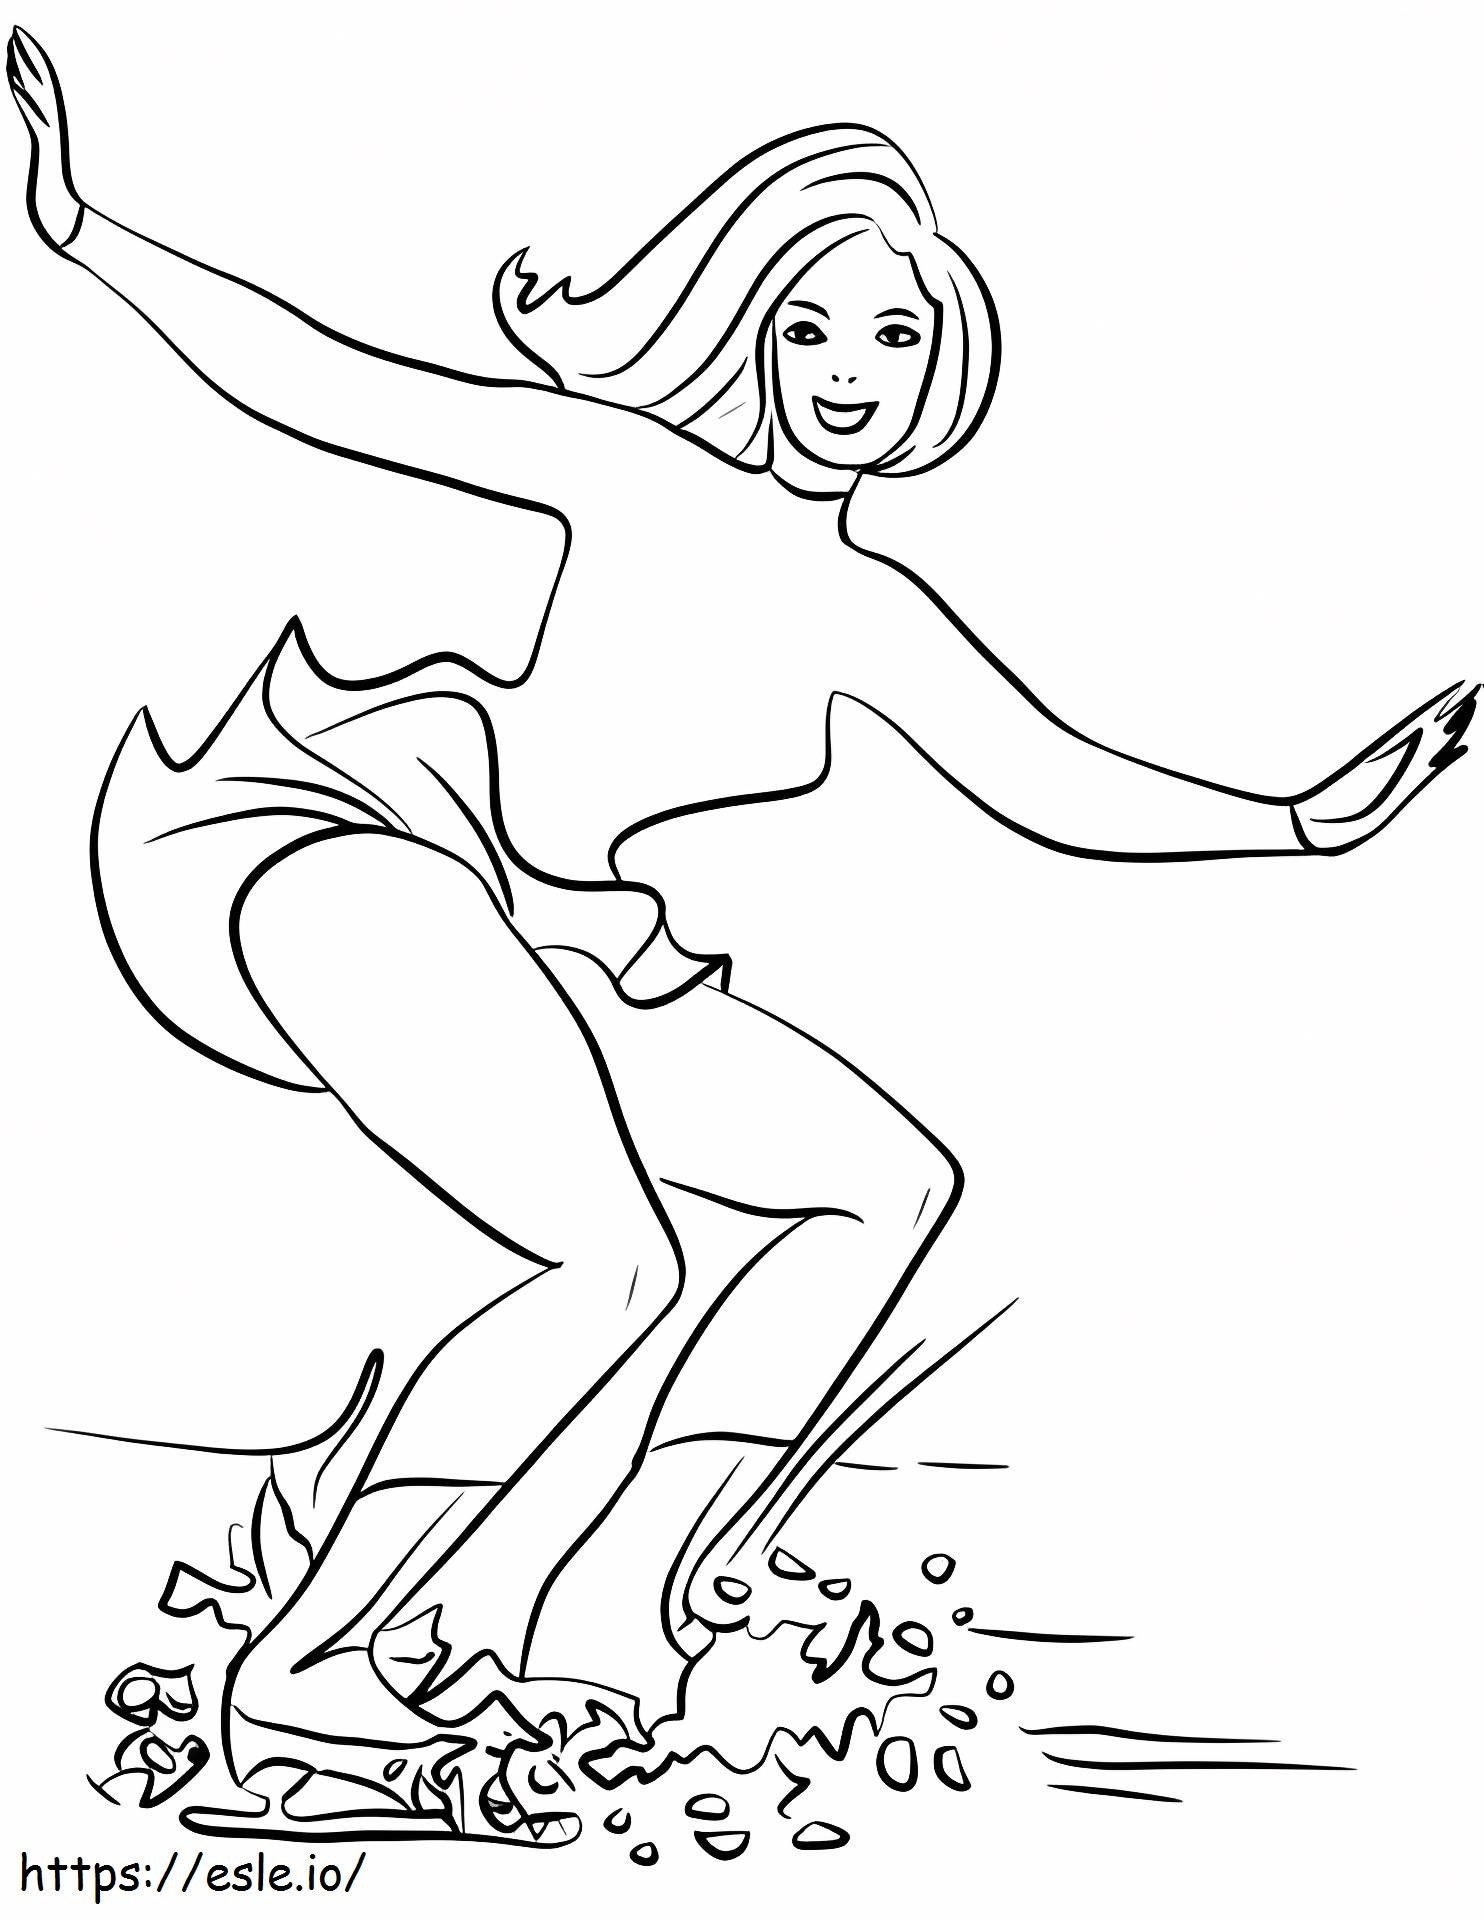 Cool Girl Goes Ice Skating coloring page